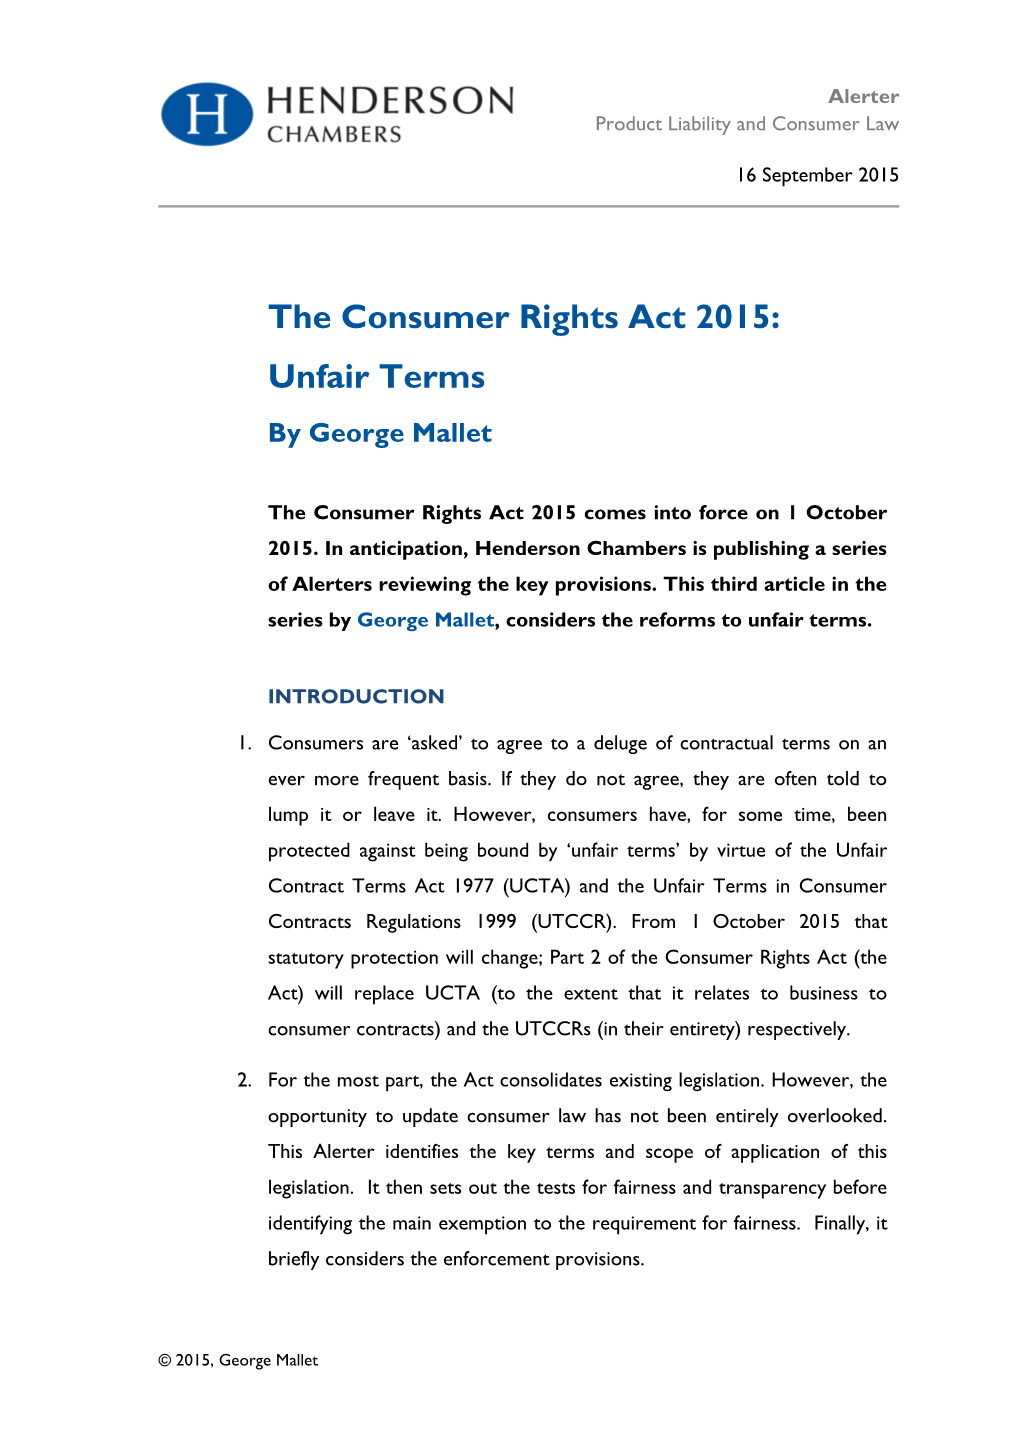 The Consumer Rights Act 2015: Unfair Terms by George Mallet